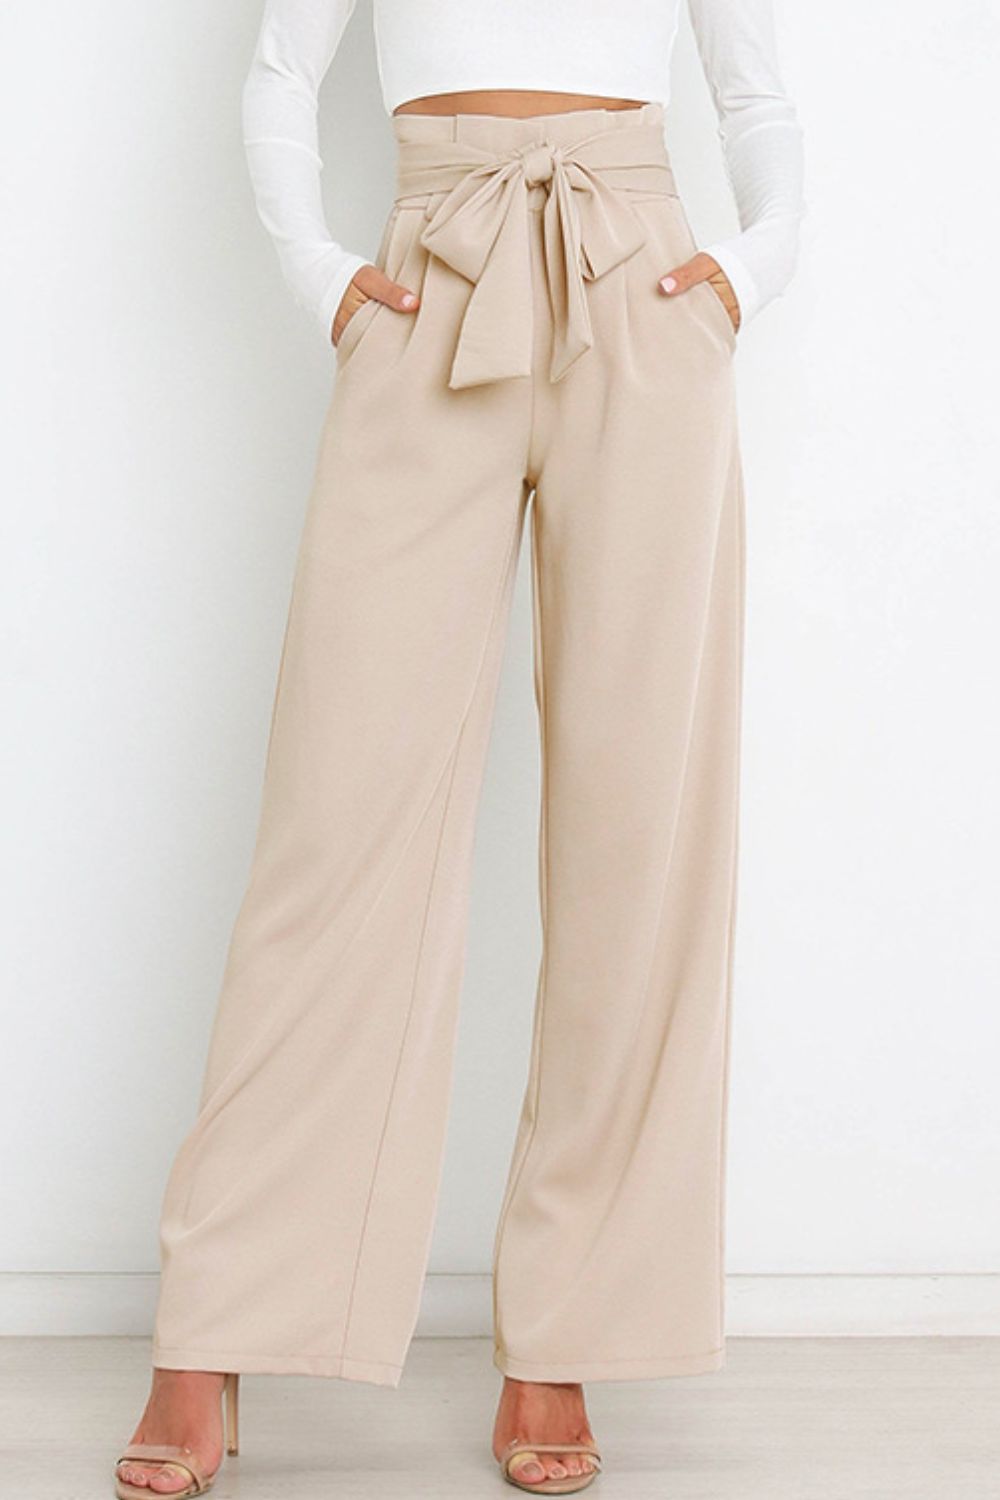 Tie Front Paperbag Wide Leg Pants Print on any thing USA/STOD clothes